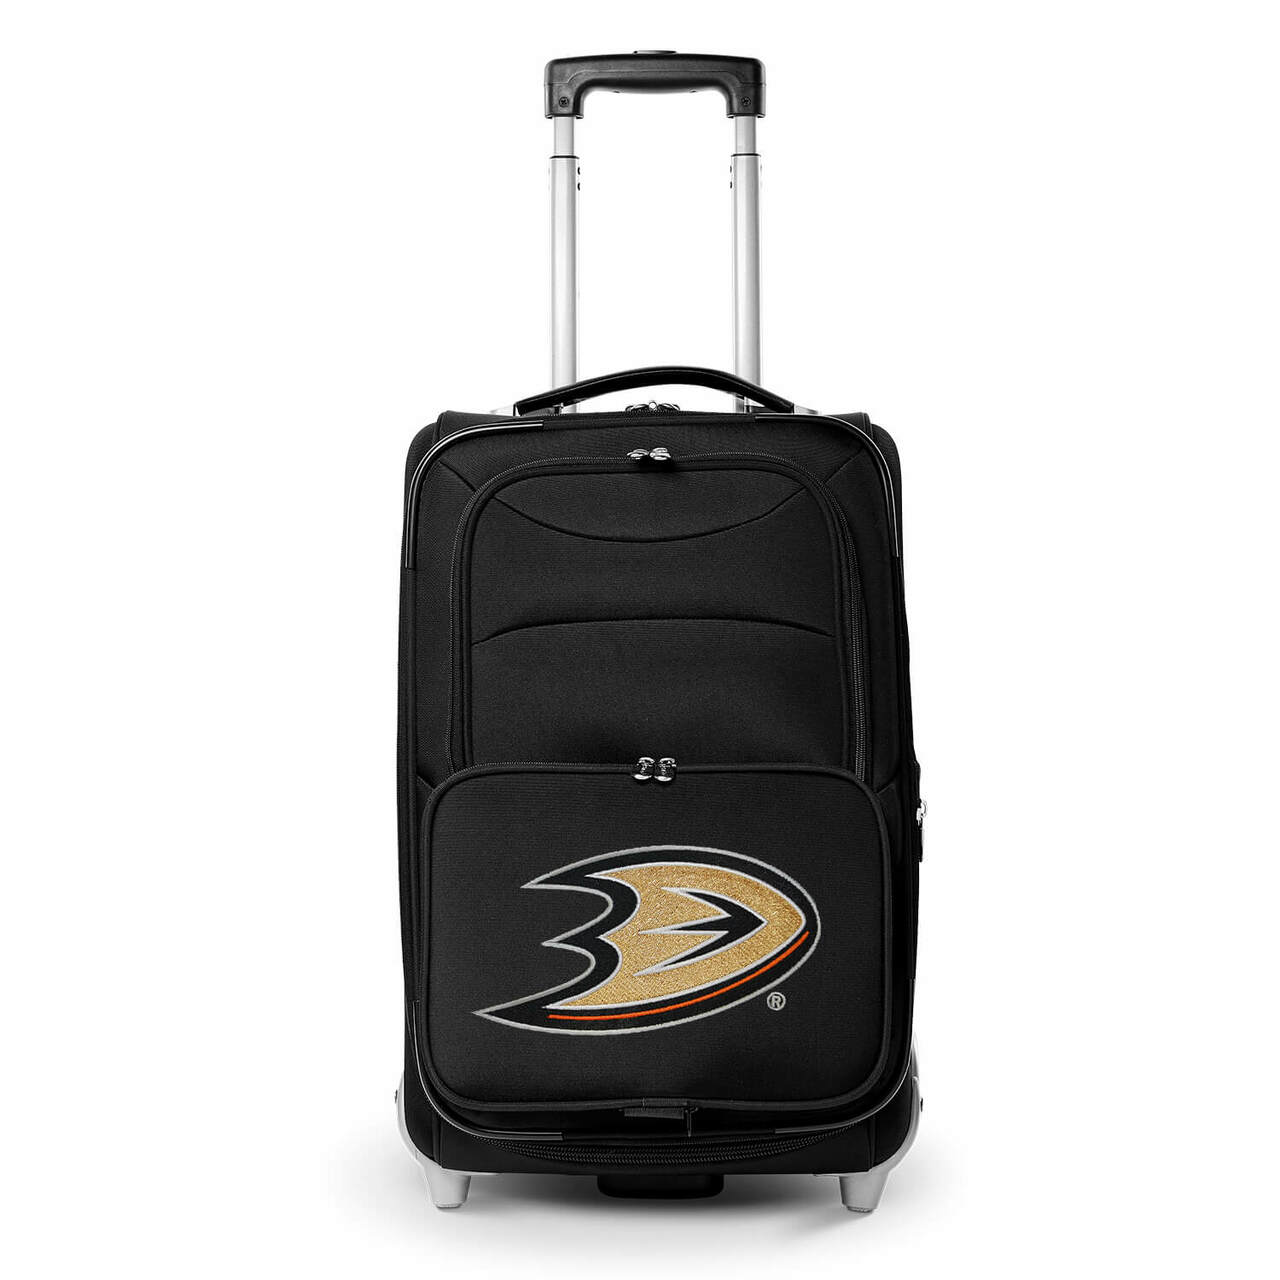 Mighty Ducks Carry On Luggage | Anaheim Mighty Ducks Rolling Carry On Luggage